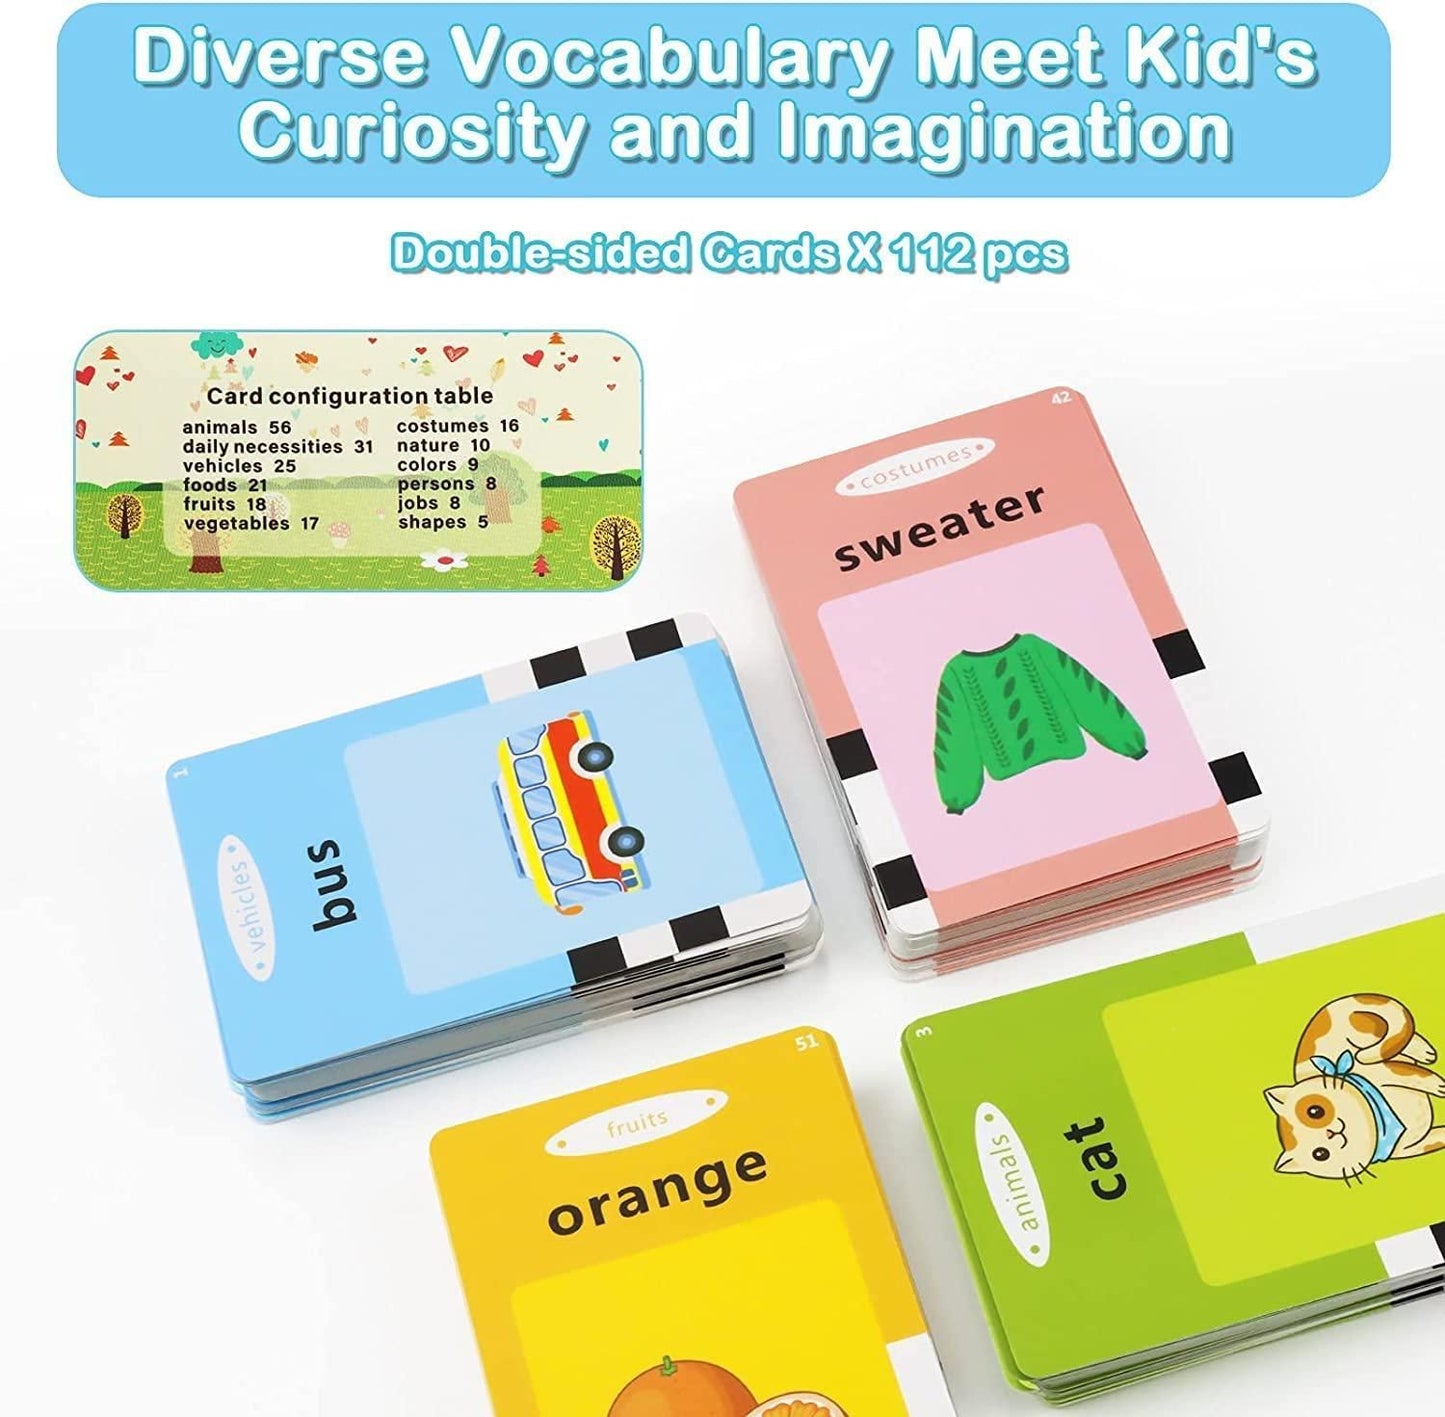 iPretty Talking Flash Cards for Kids - Early Educational Learning Toy